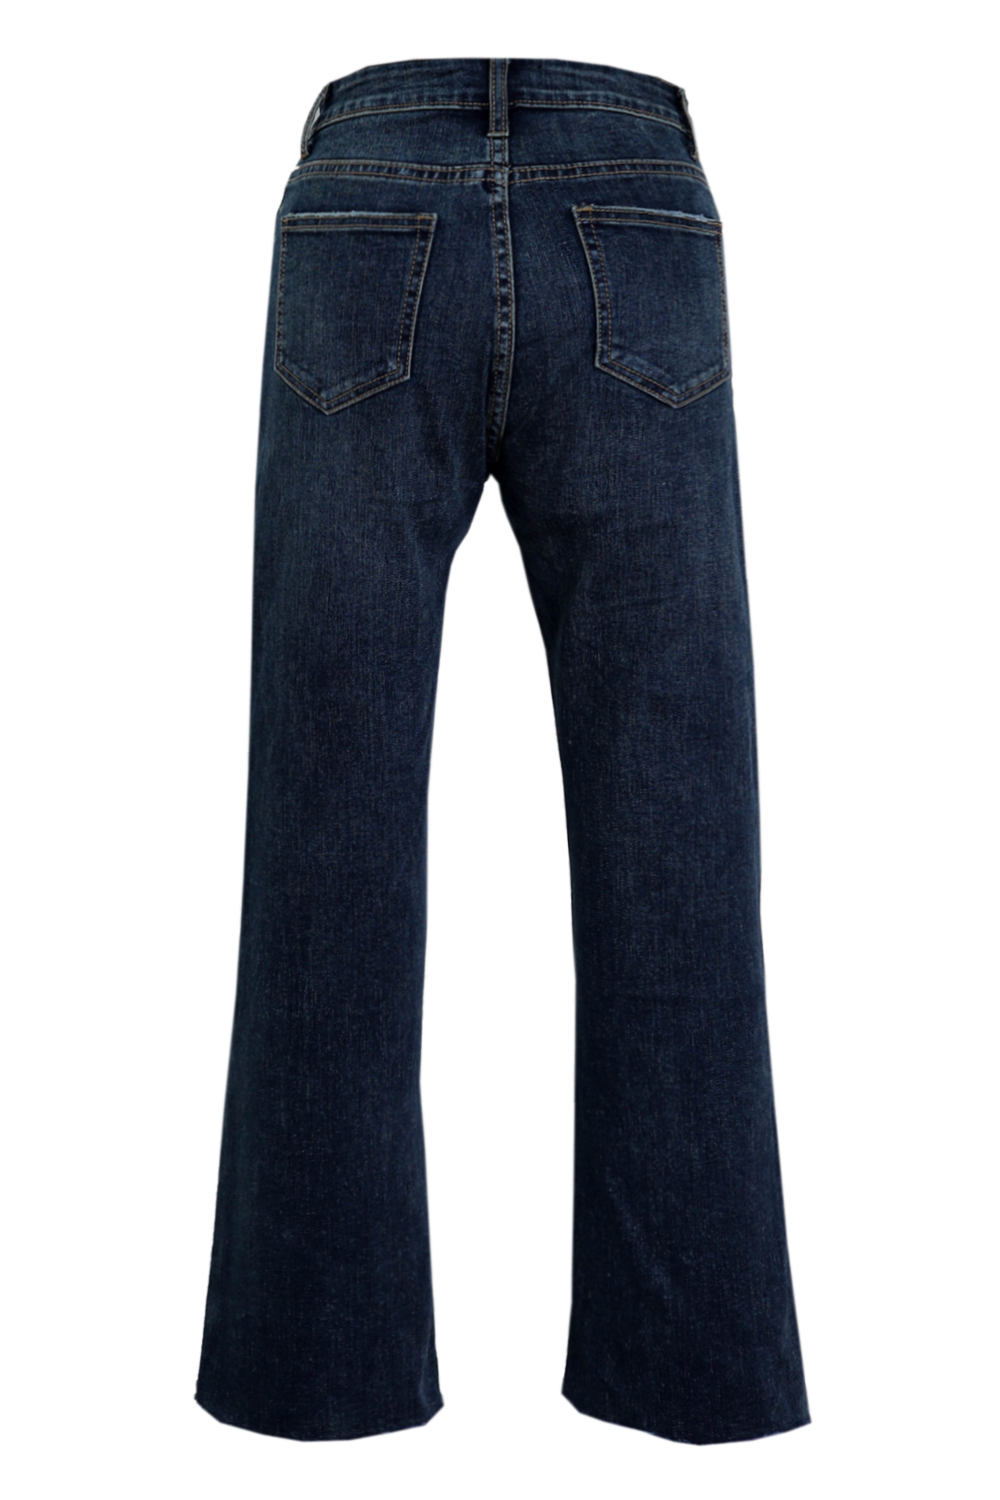 CROP FLARE JEANS - XANH